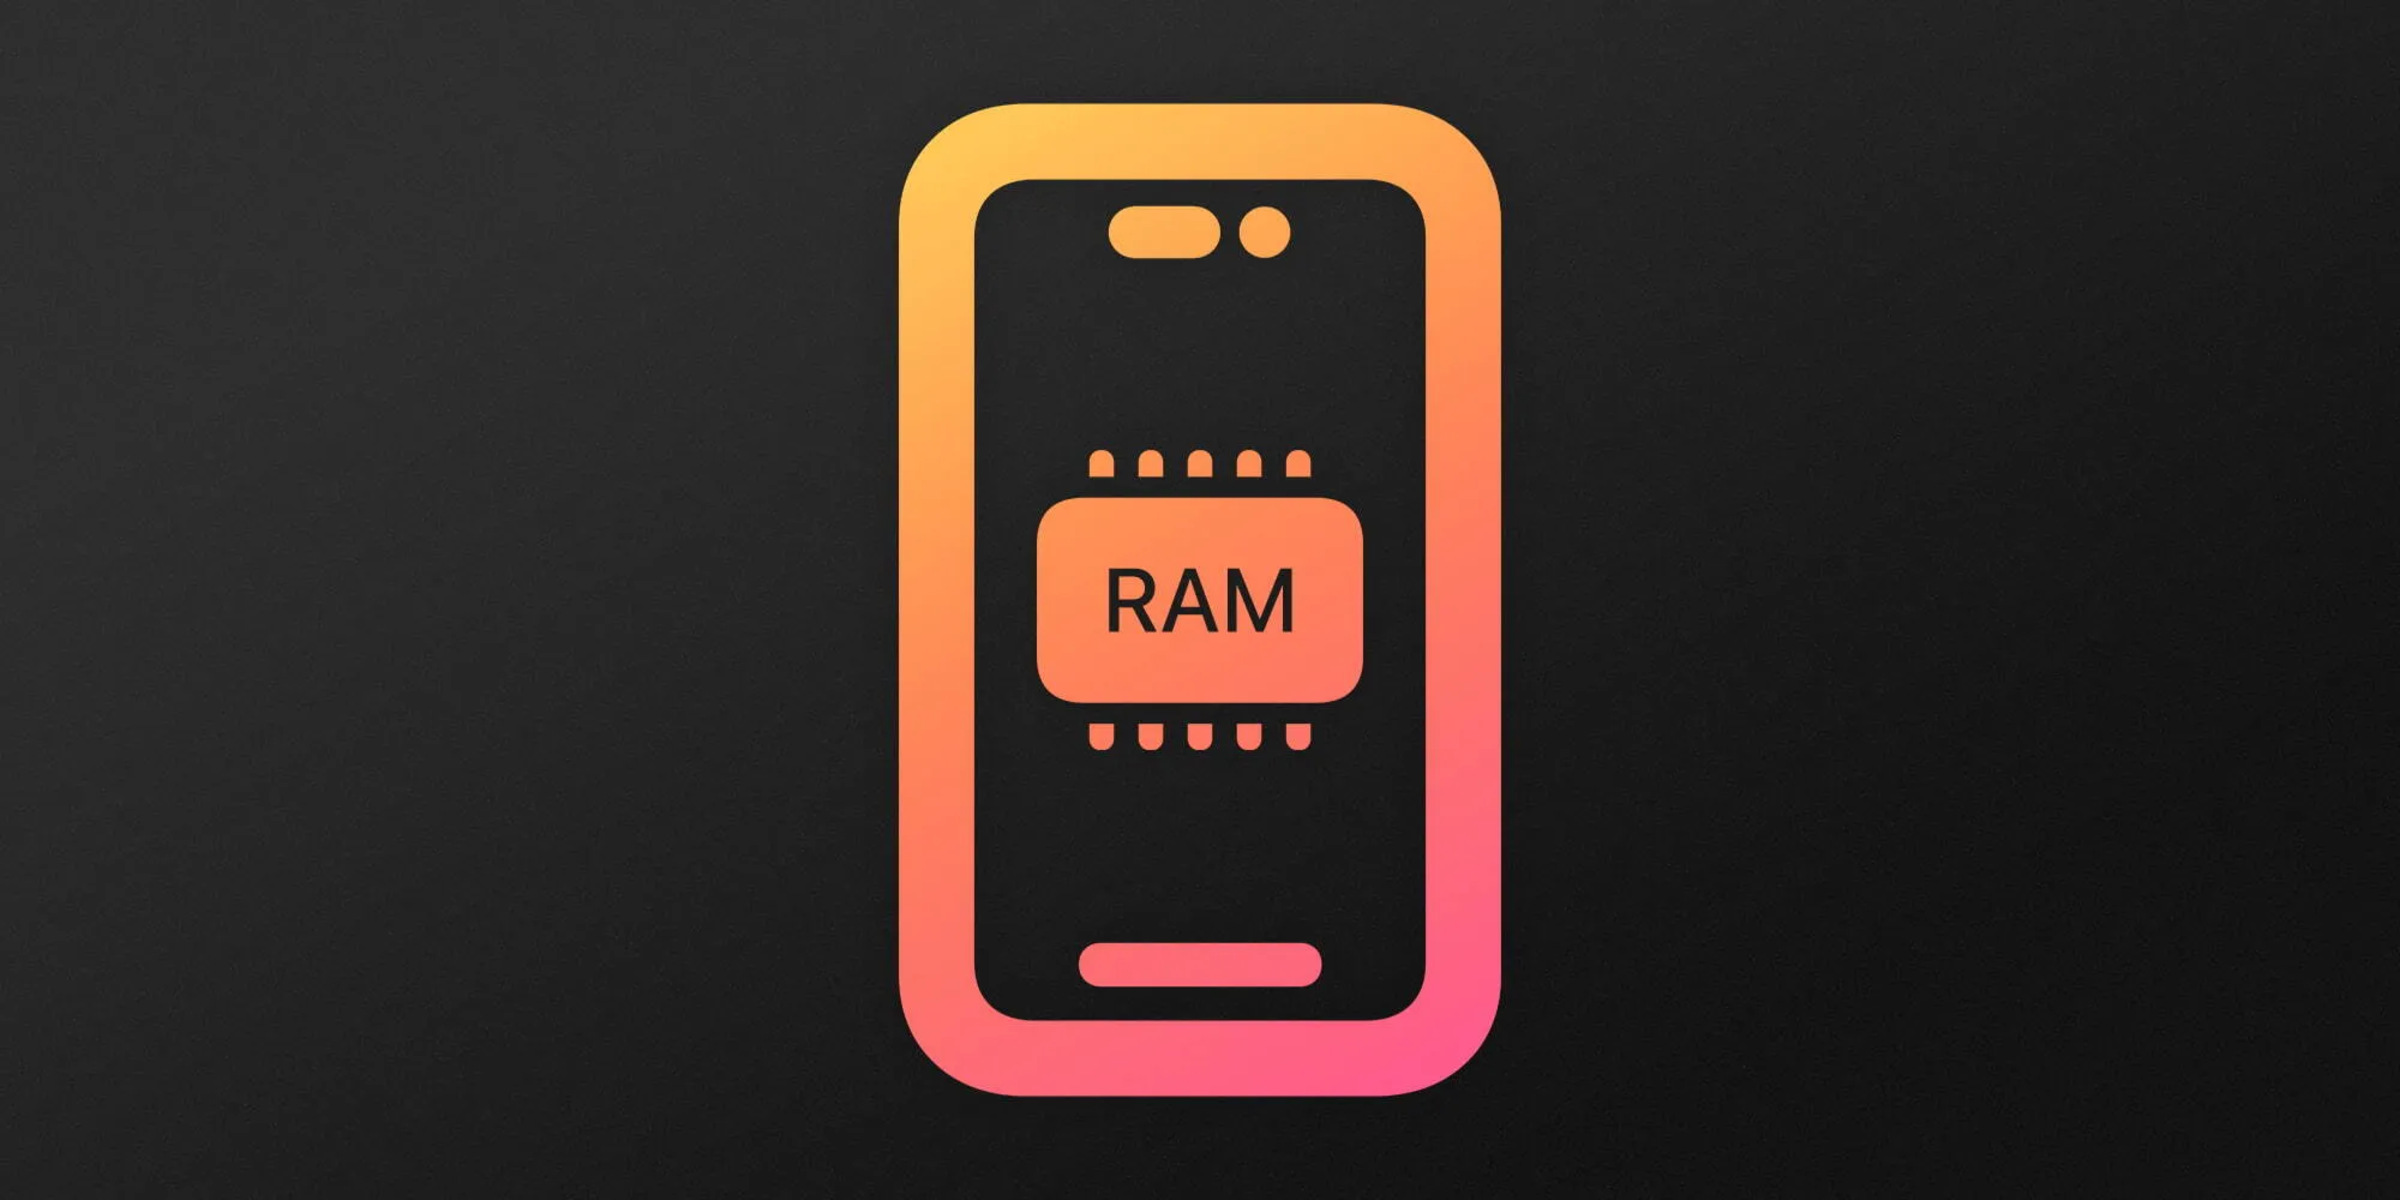 How Much RAM Does IPhone 14 Have